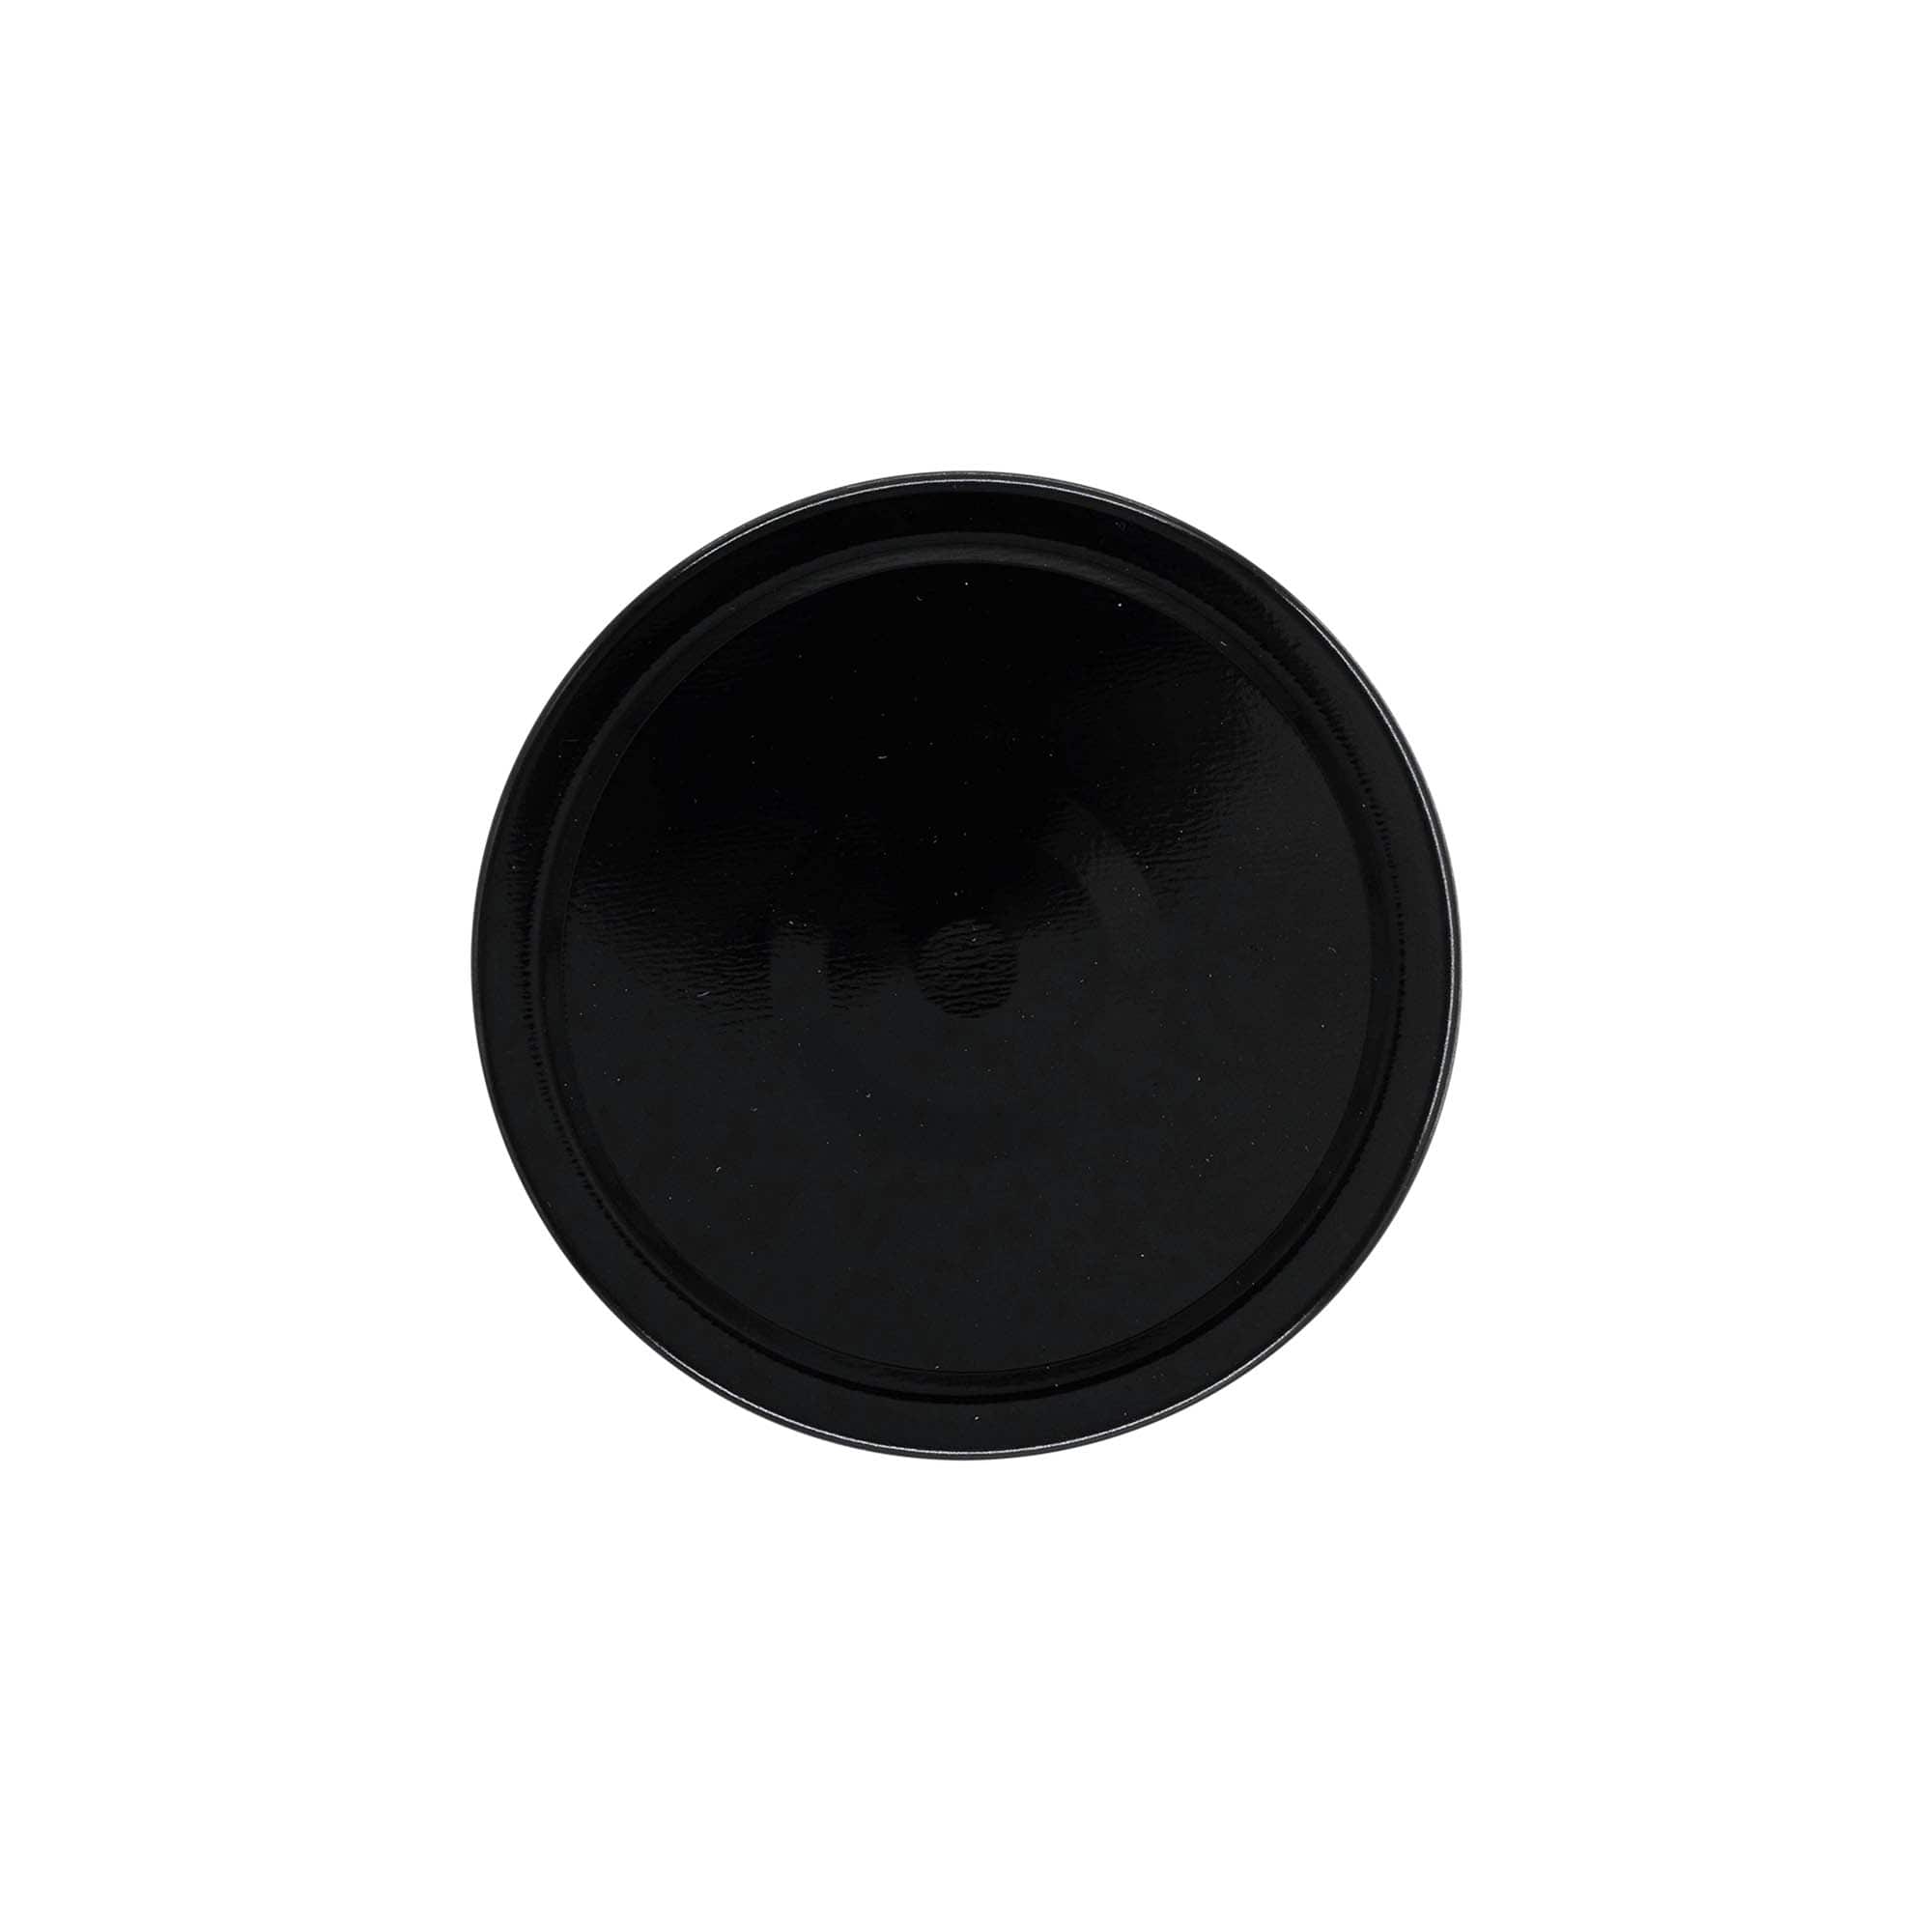 Deep twist off lid, tinplate, black, for opening: Deep-TO 82